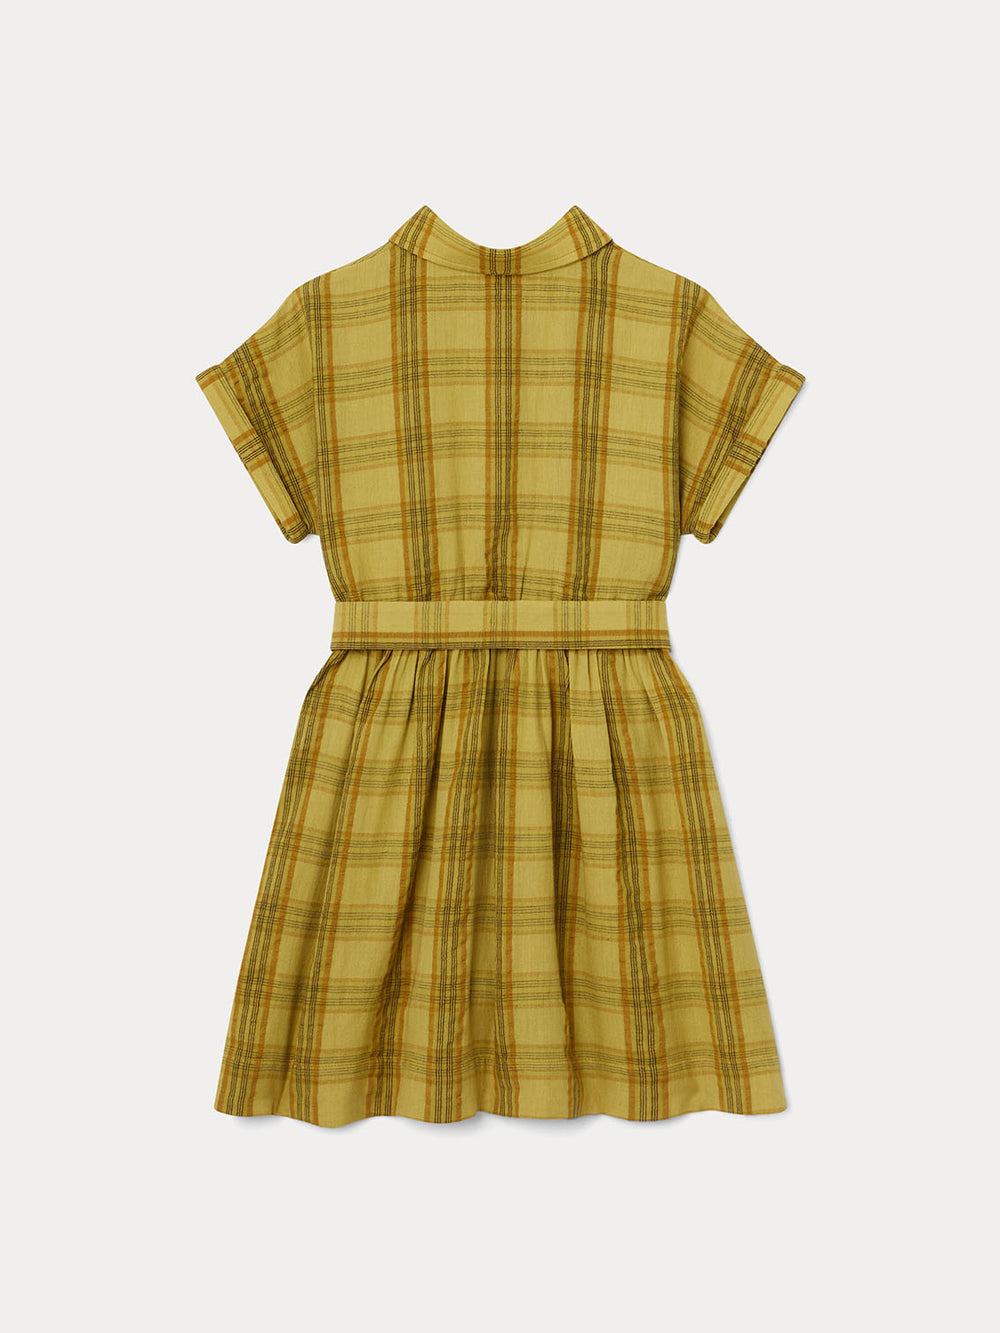 Dyed Woven Cotton Voile Dress for Girls acid yellow